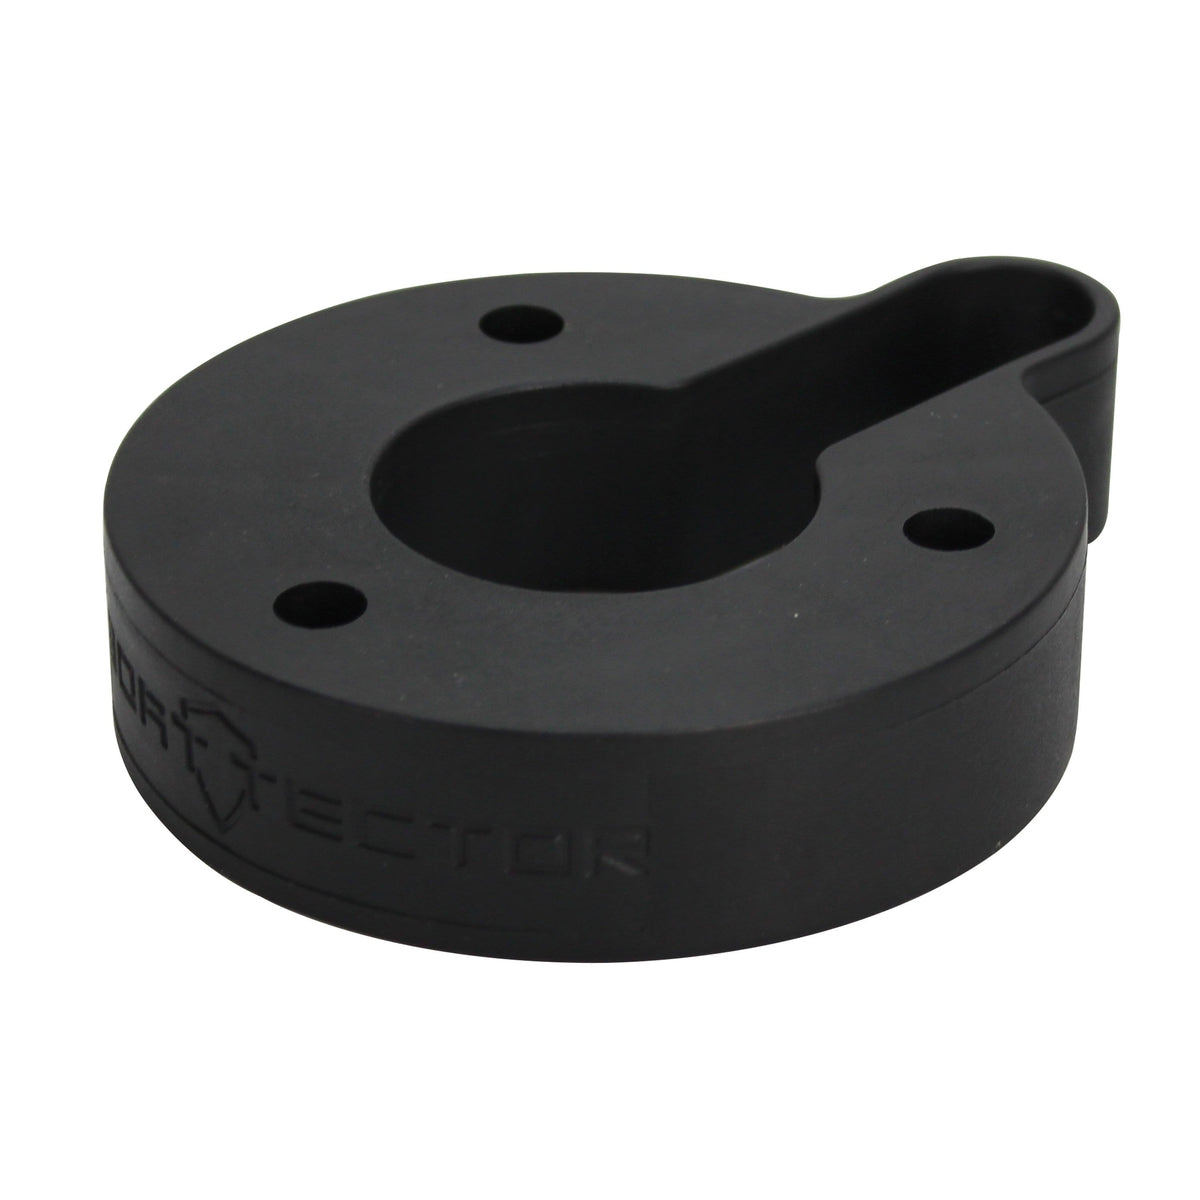 Extreme Max Qualifies for Free Shipping Extreme Max Clean Rig Spacer Large 3-11/16" Diameter #3002.4567